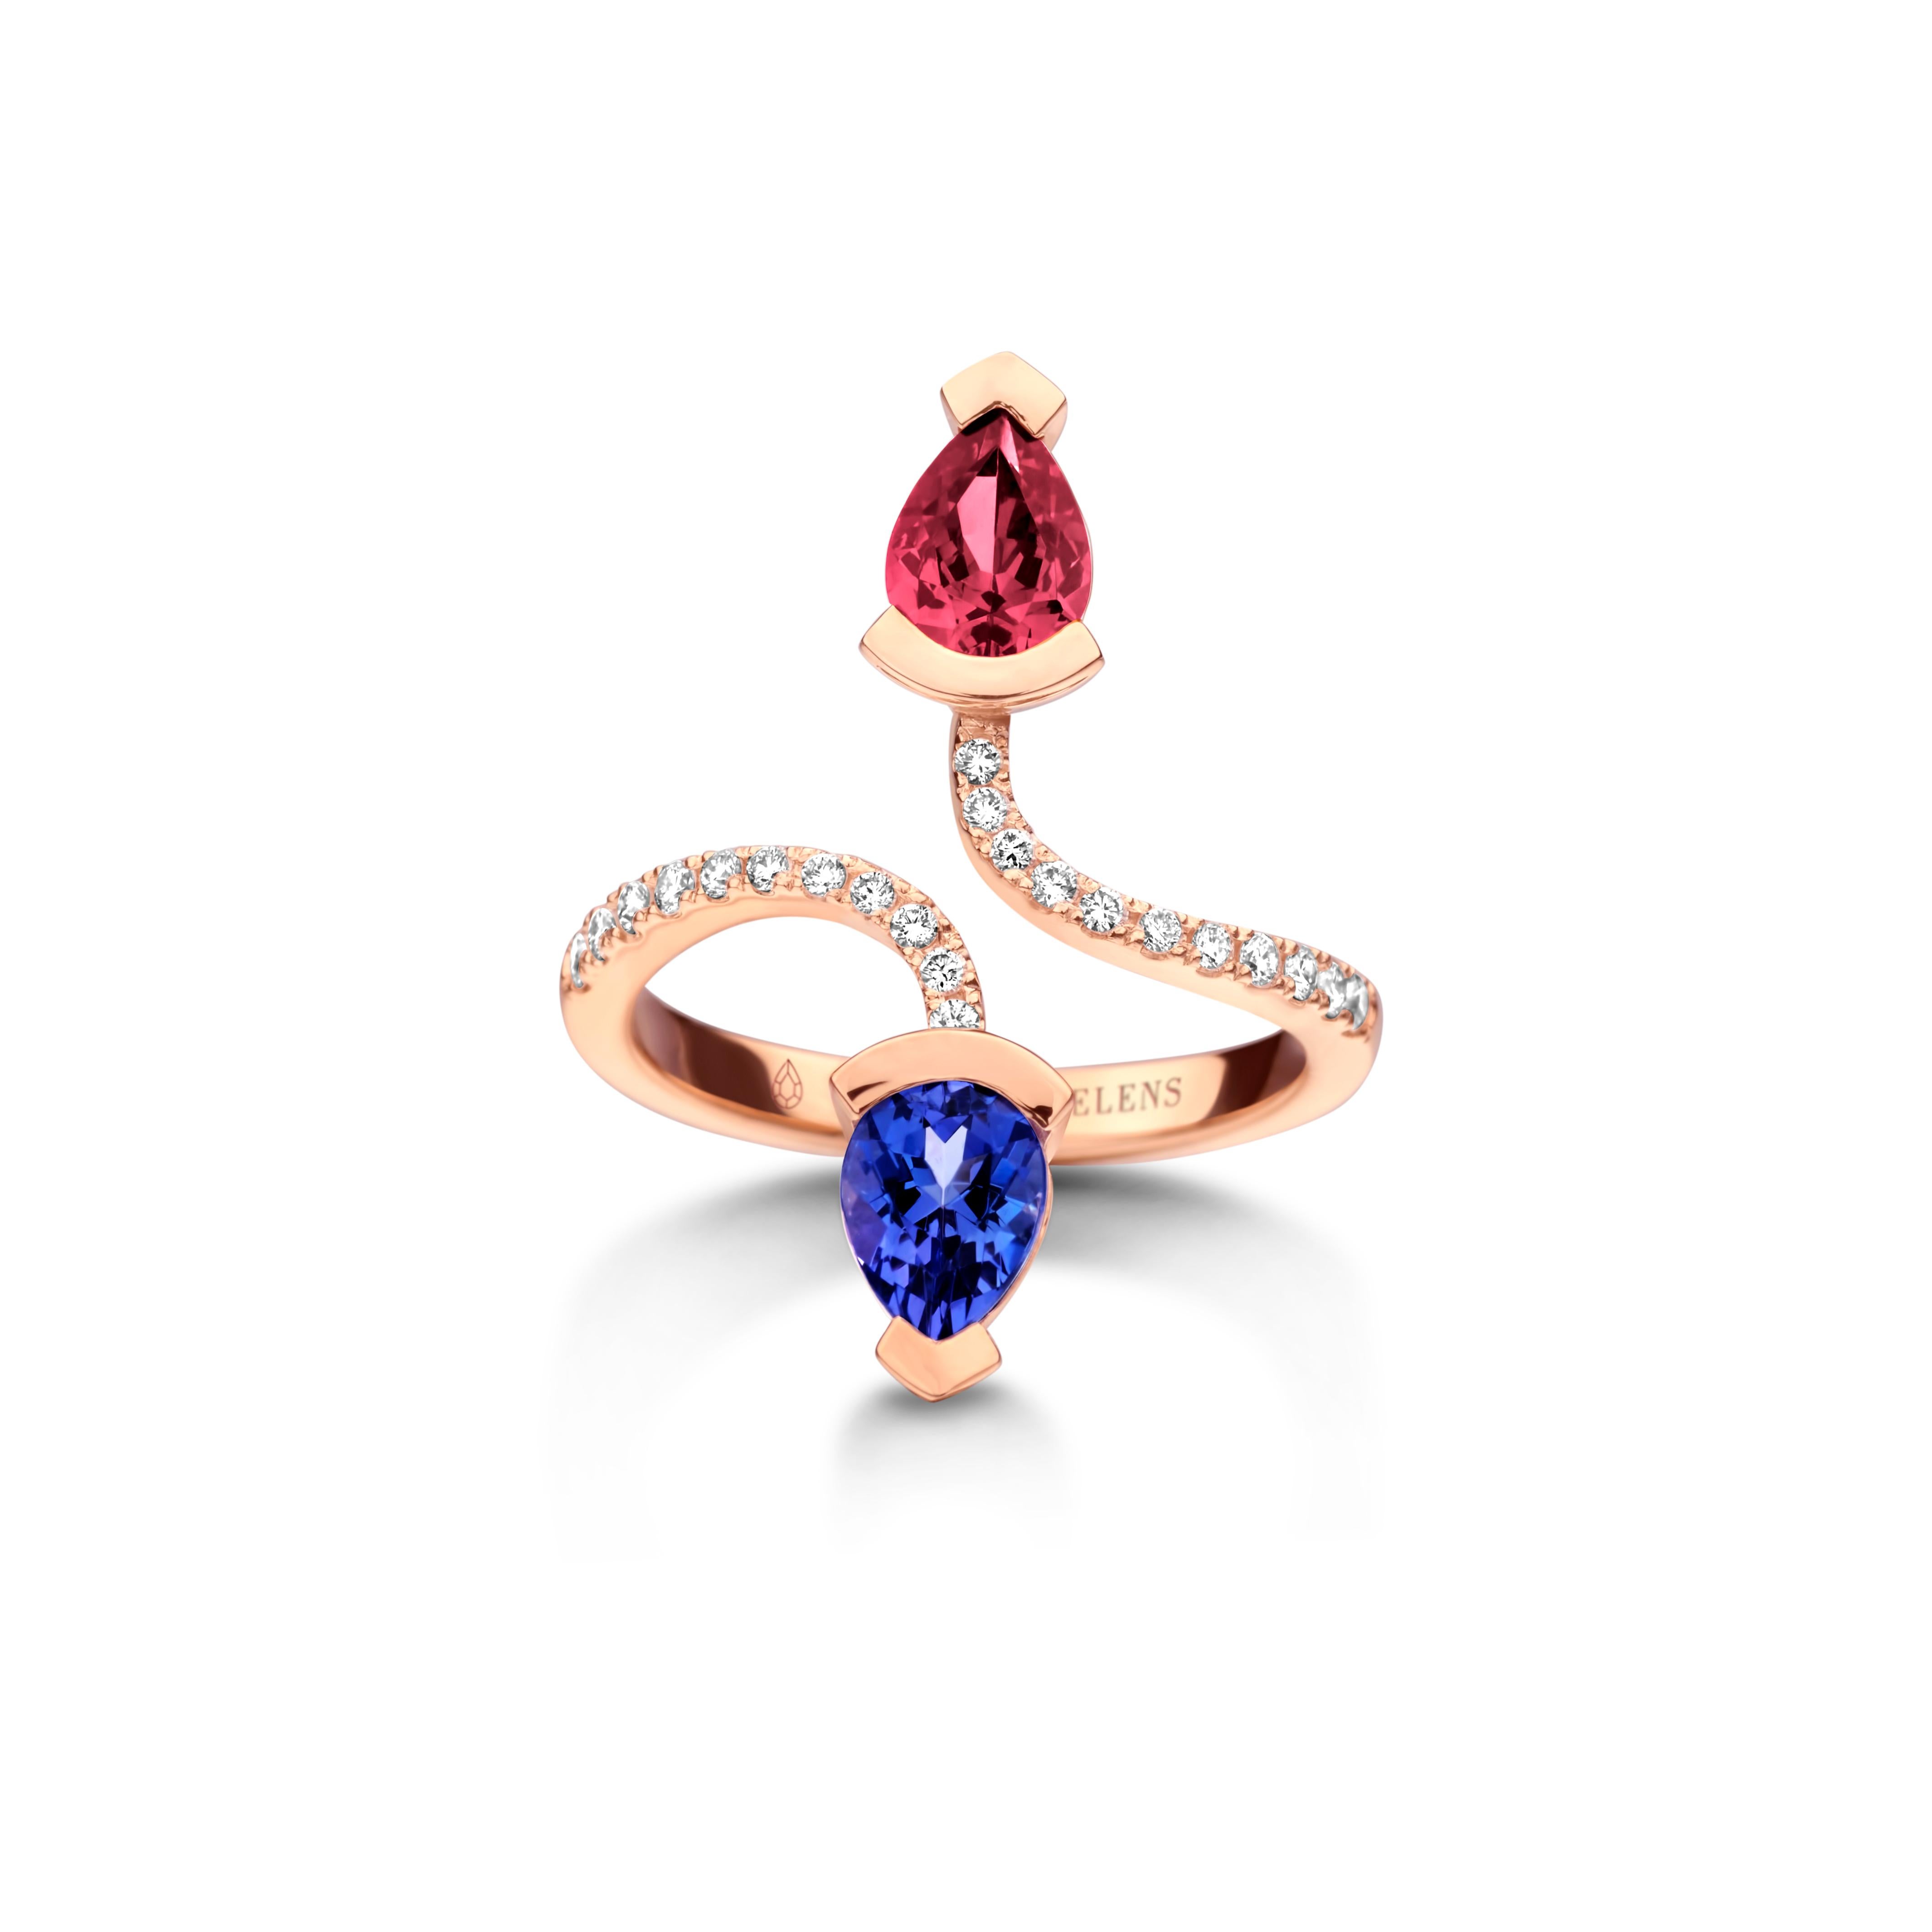 Adeline Duo ring in 18Kt yellow gold 5g set with a pear-shaped rubellite 0,70 Ct, a pear-shaped Tanzanite 0,70 Ct and 0,19 Ct of white brilliant cut diamonds - VS F quality. Celine Roelens, a goldsmith and gemologist, is specialized in unique, fine